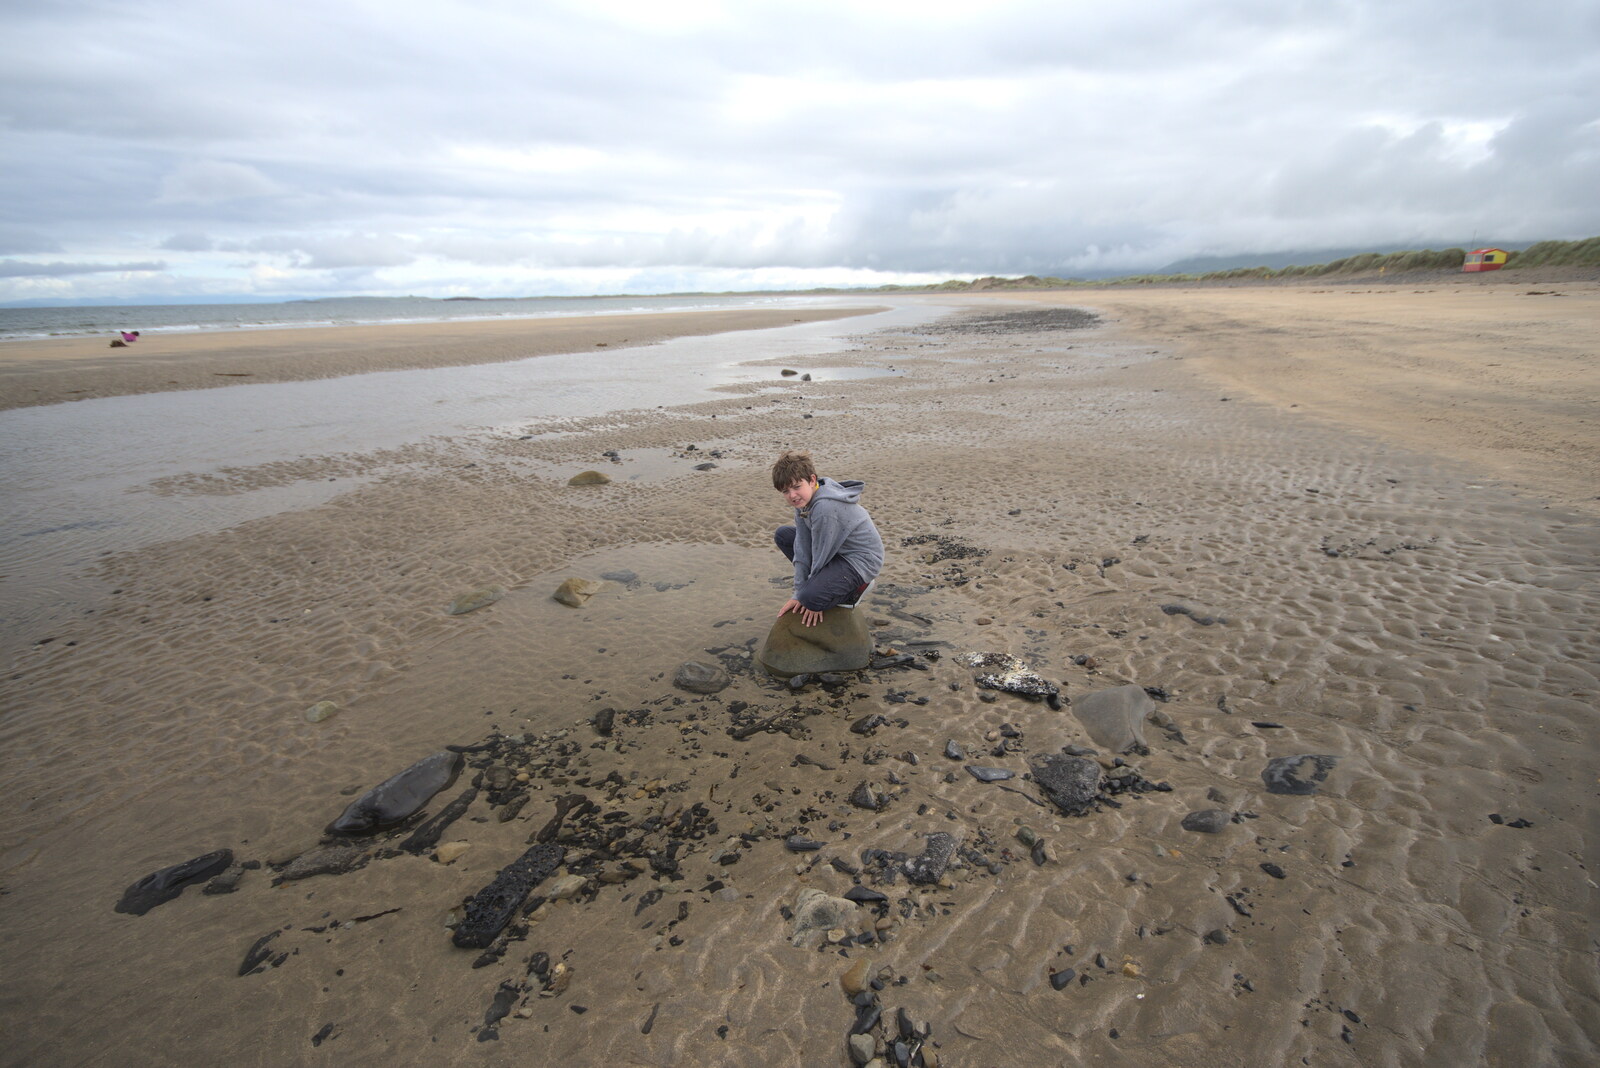 Pints of Guinness and Streedagh Beach, Grange and Sligo, Ireland - 9th August 2021: Fred on a rock